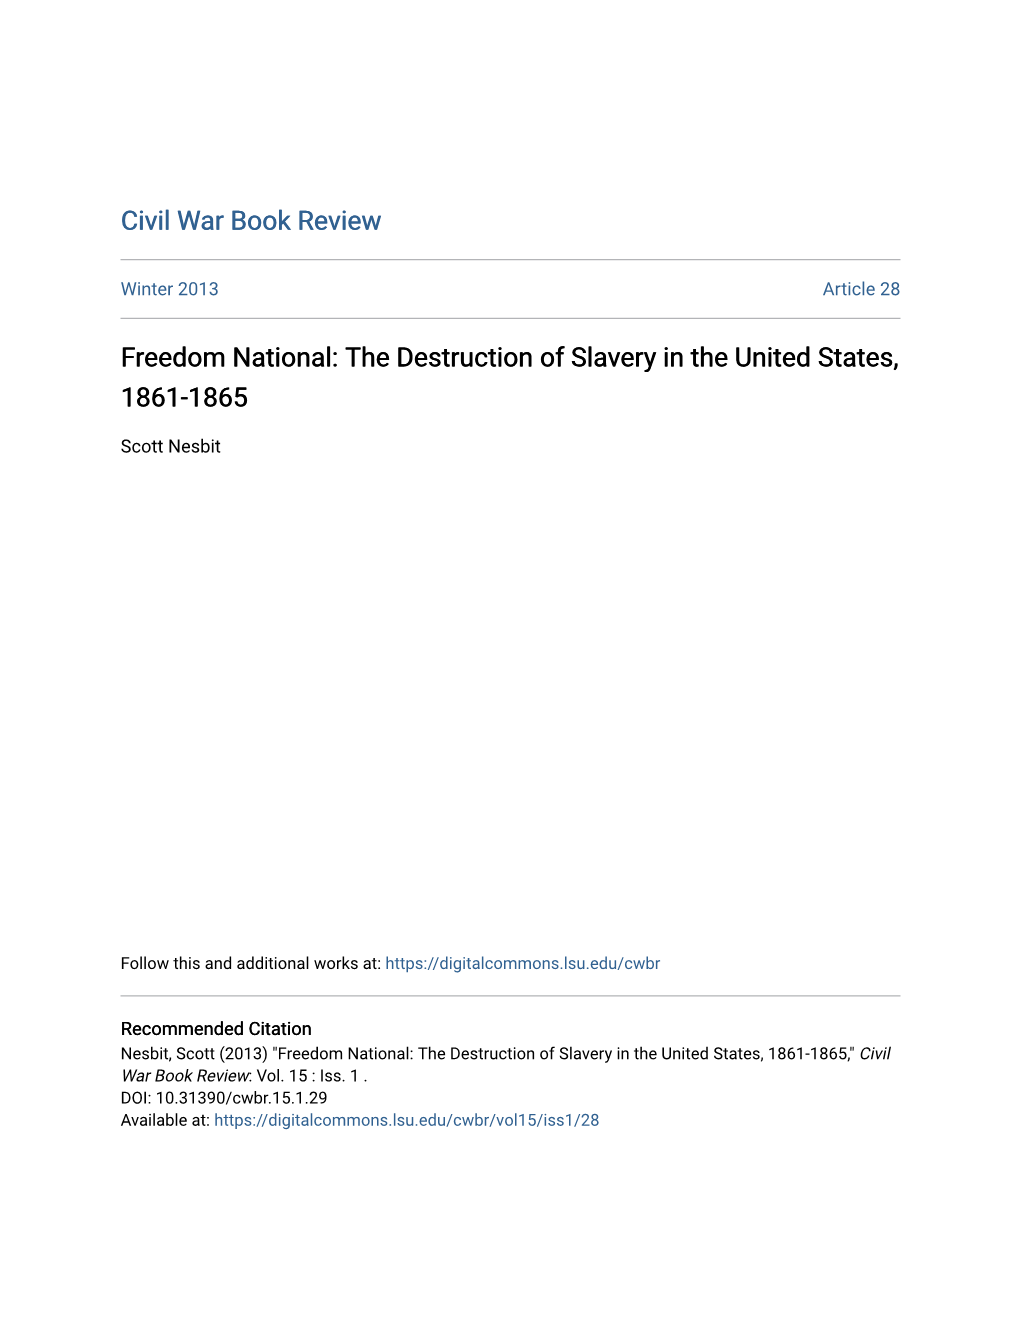 Freedom National: the Destruction of Slavery in the United States, 1861-1865